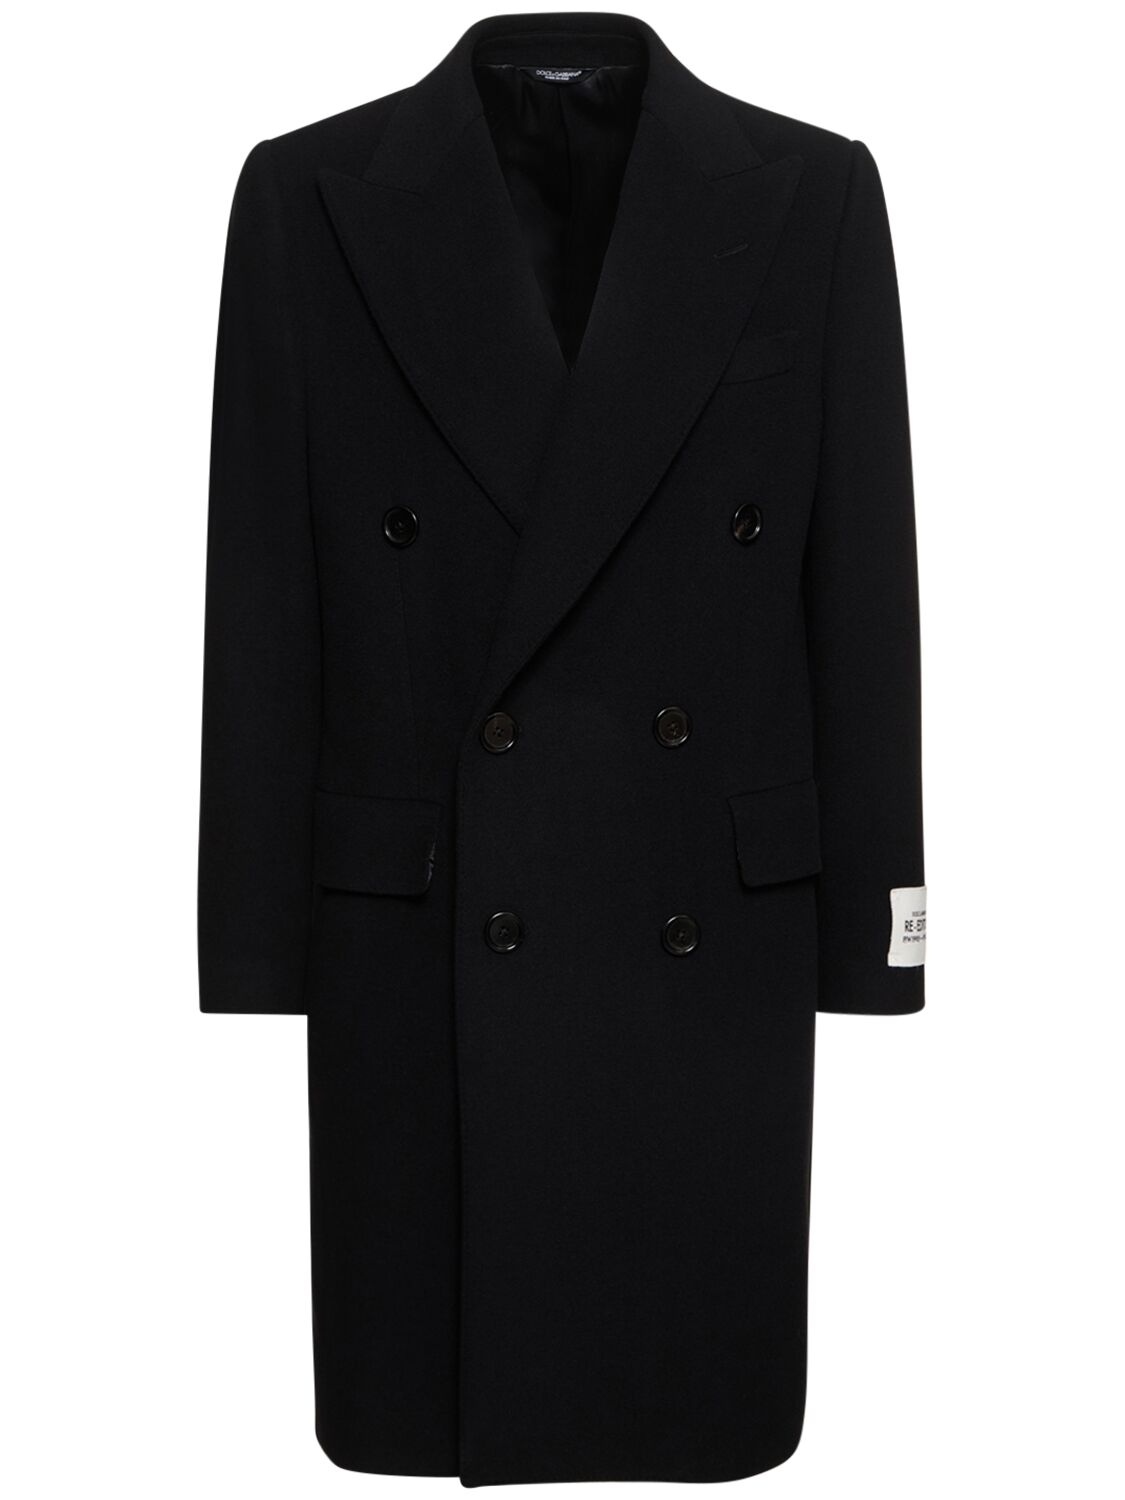 DOLCE & GABBANA RE-EDITION DOUBLE BREASTED WOOL COAT